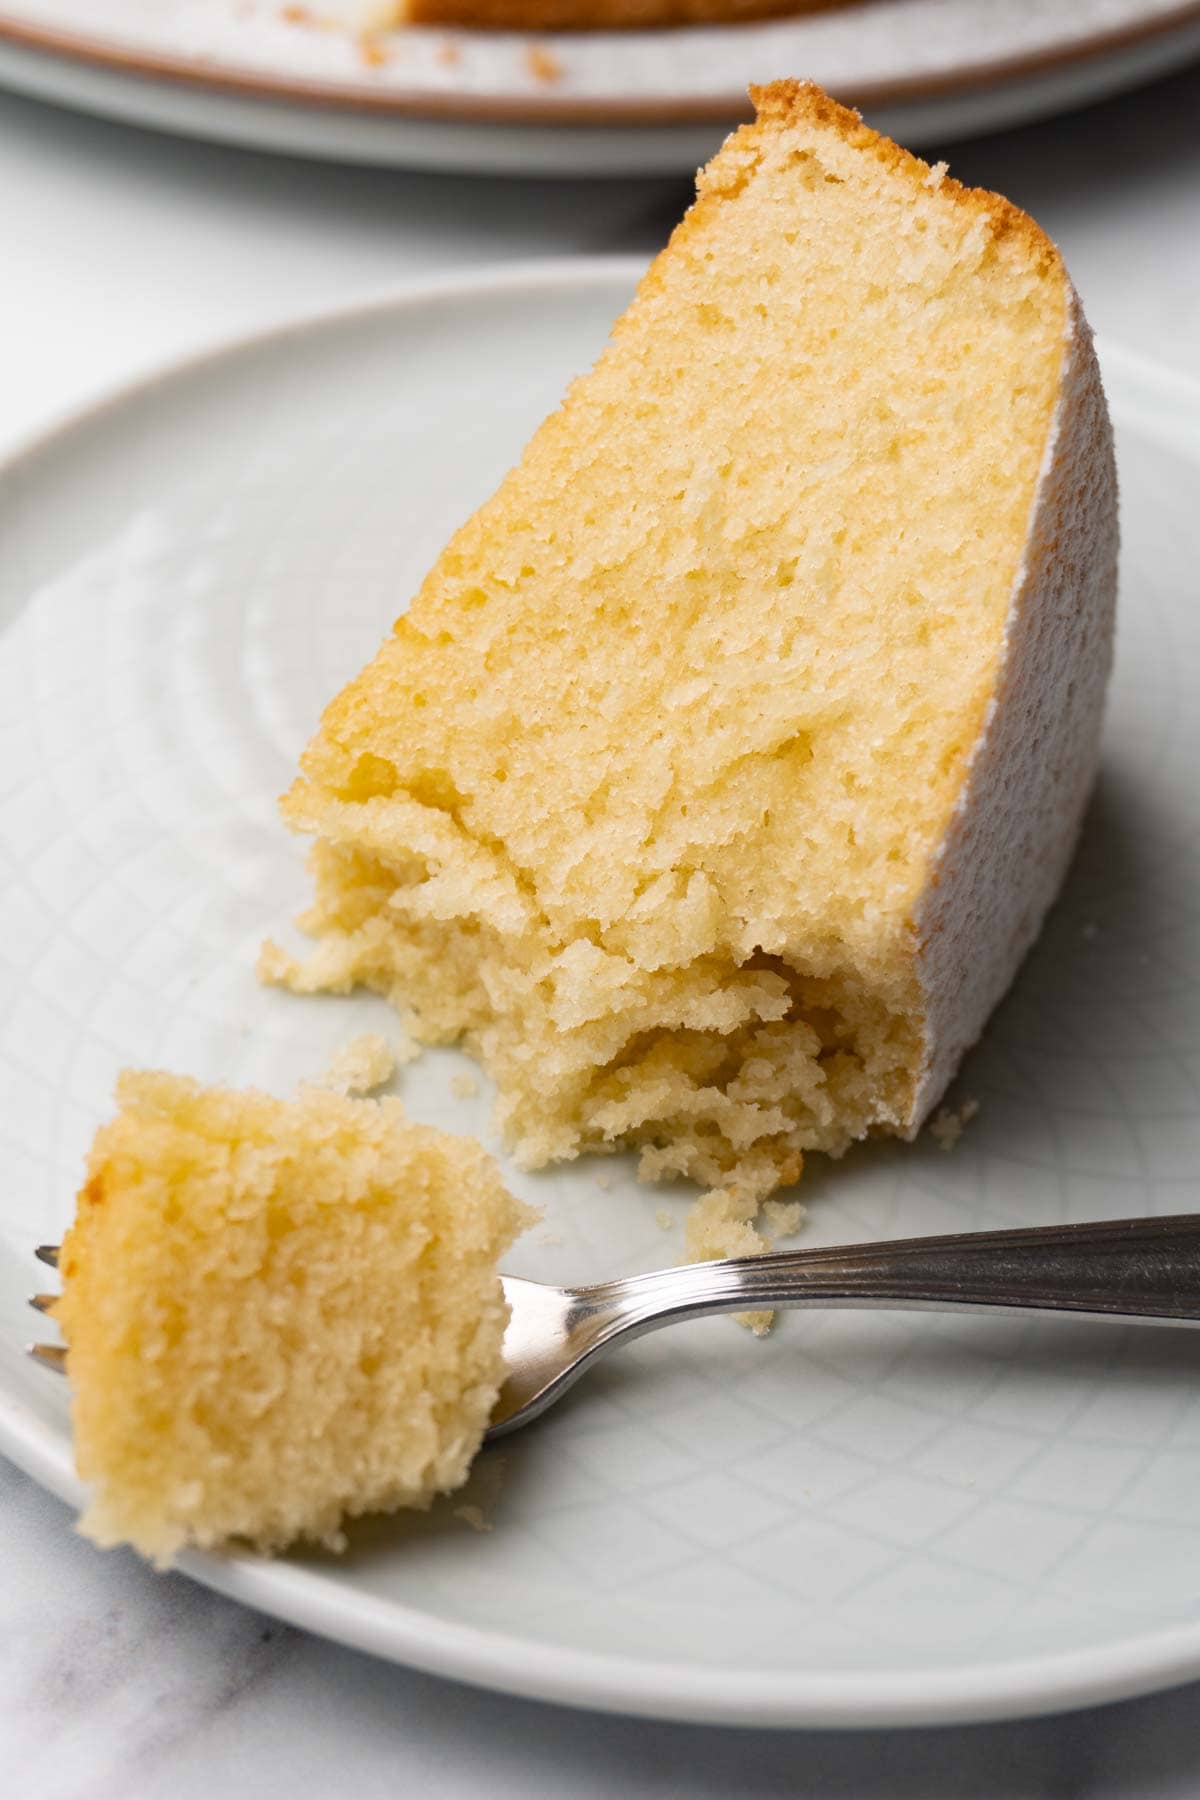 A piece of cake dusted with powdered sugar on a small round serving plate. Several bites were taken.